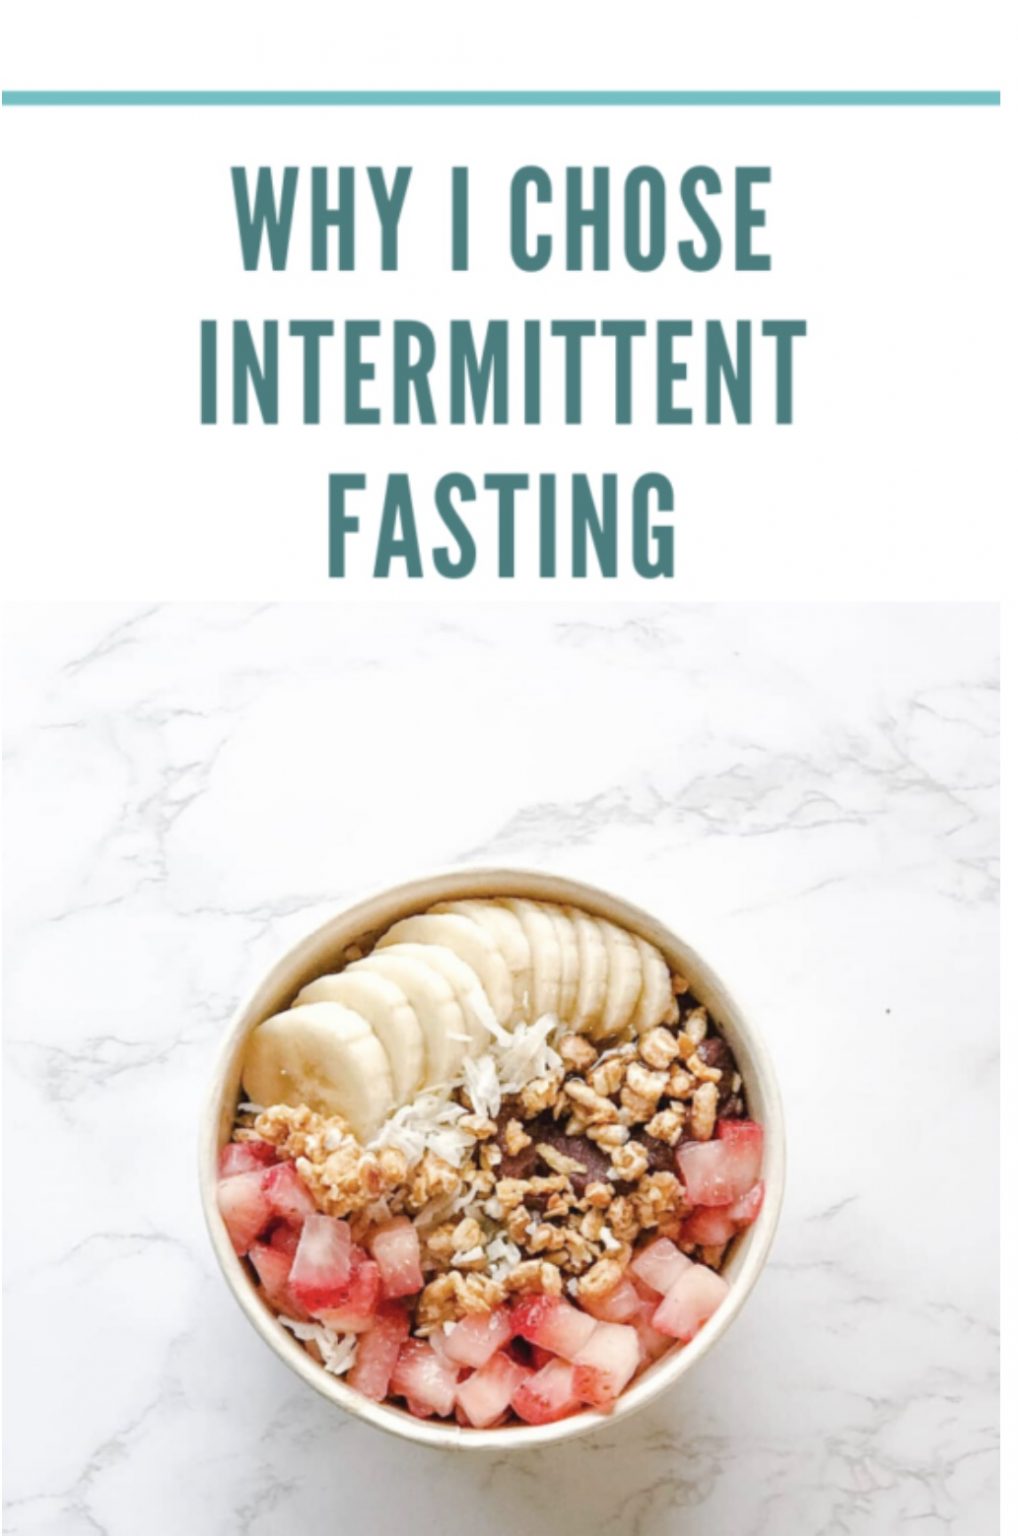 WHY I CHOOSE INTERMITTENT FASTING…